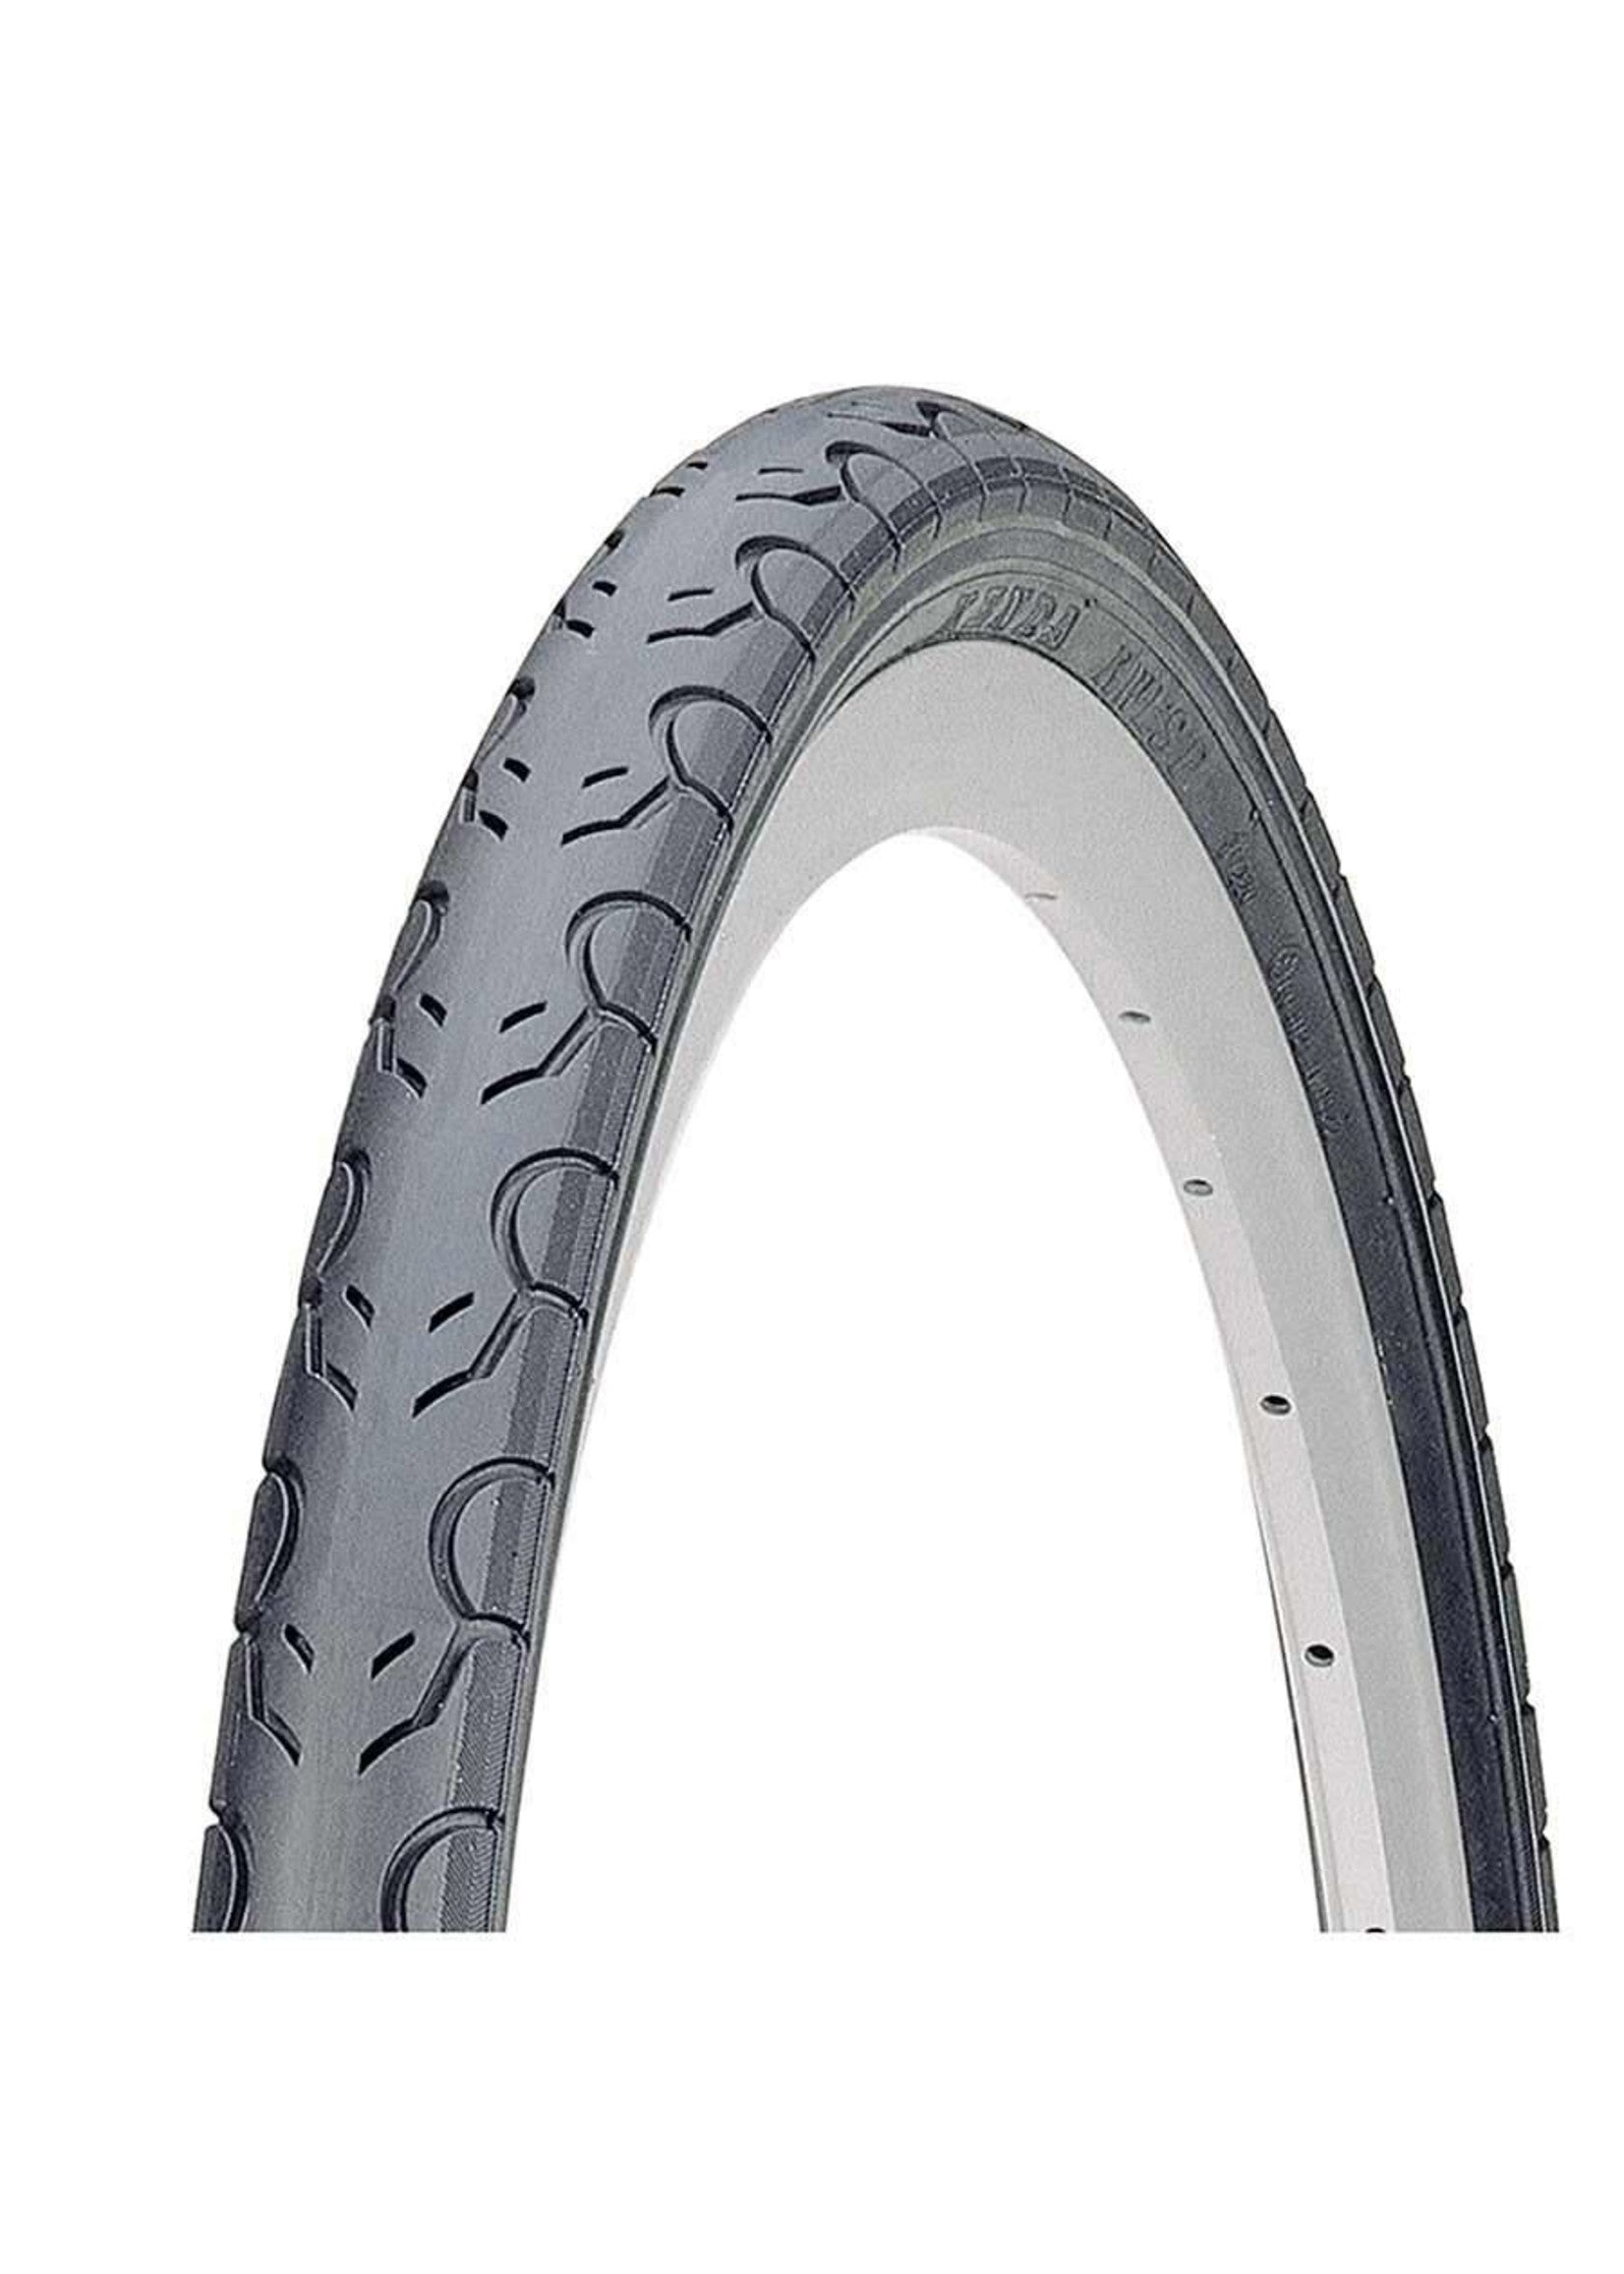 Kenda Kwest K193 Bicycle Tire 700 X 35C K-Shield 60Tpi-Sports Replay - Sports Excellence-Sports Replay - Sports Excellence